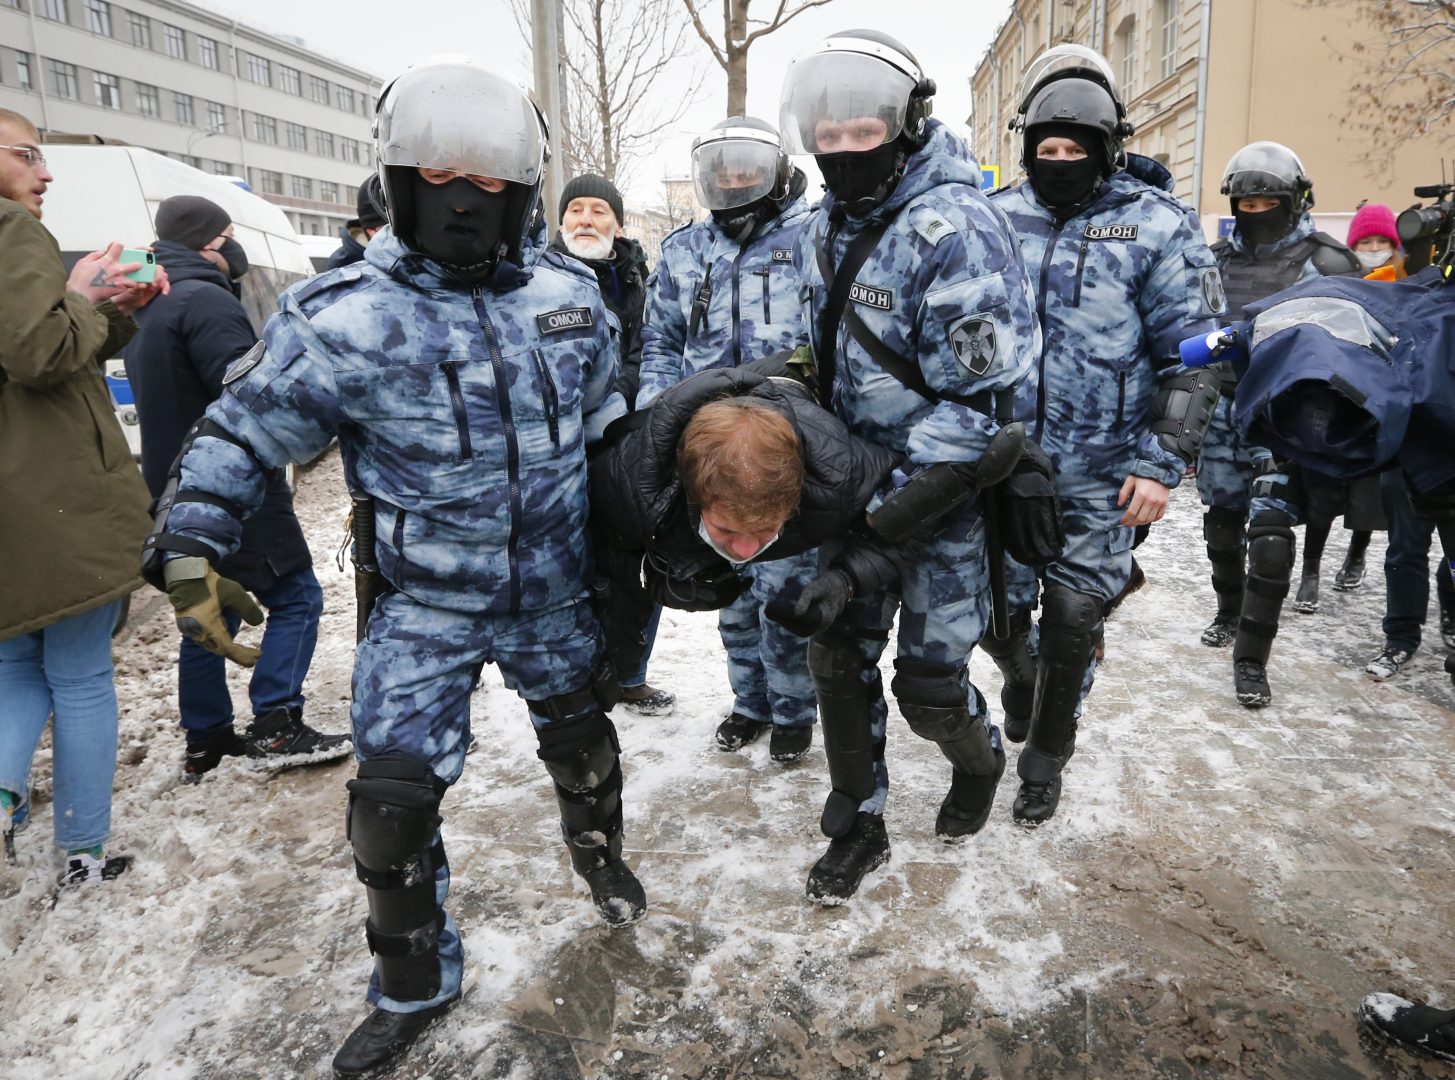 Police officers detain a man during a protest against the jailing of opposition leader Alexei Navalny in Moscow, Russia, on Sunday, Jan. 31, 2021. Thousands of people took to the streets Sunday across Russia to demand the release of jailed opposition leader Alexei Navalny, keeping up the wave of nationwide protests that have rattled the Kremlin. Hundreds were detained by police. (AP Photo/Alexander Zemlianichenko)